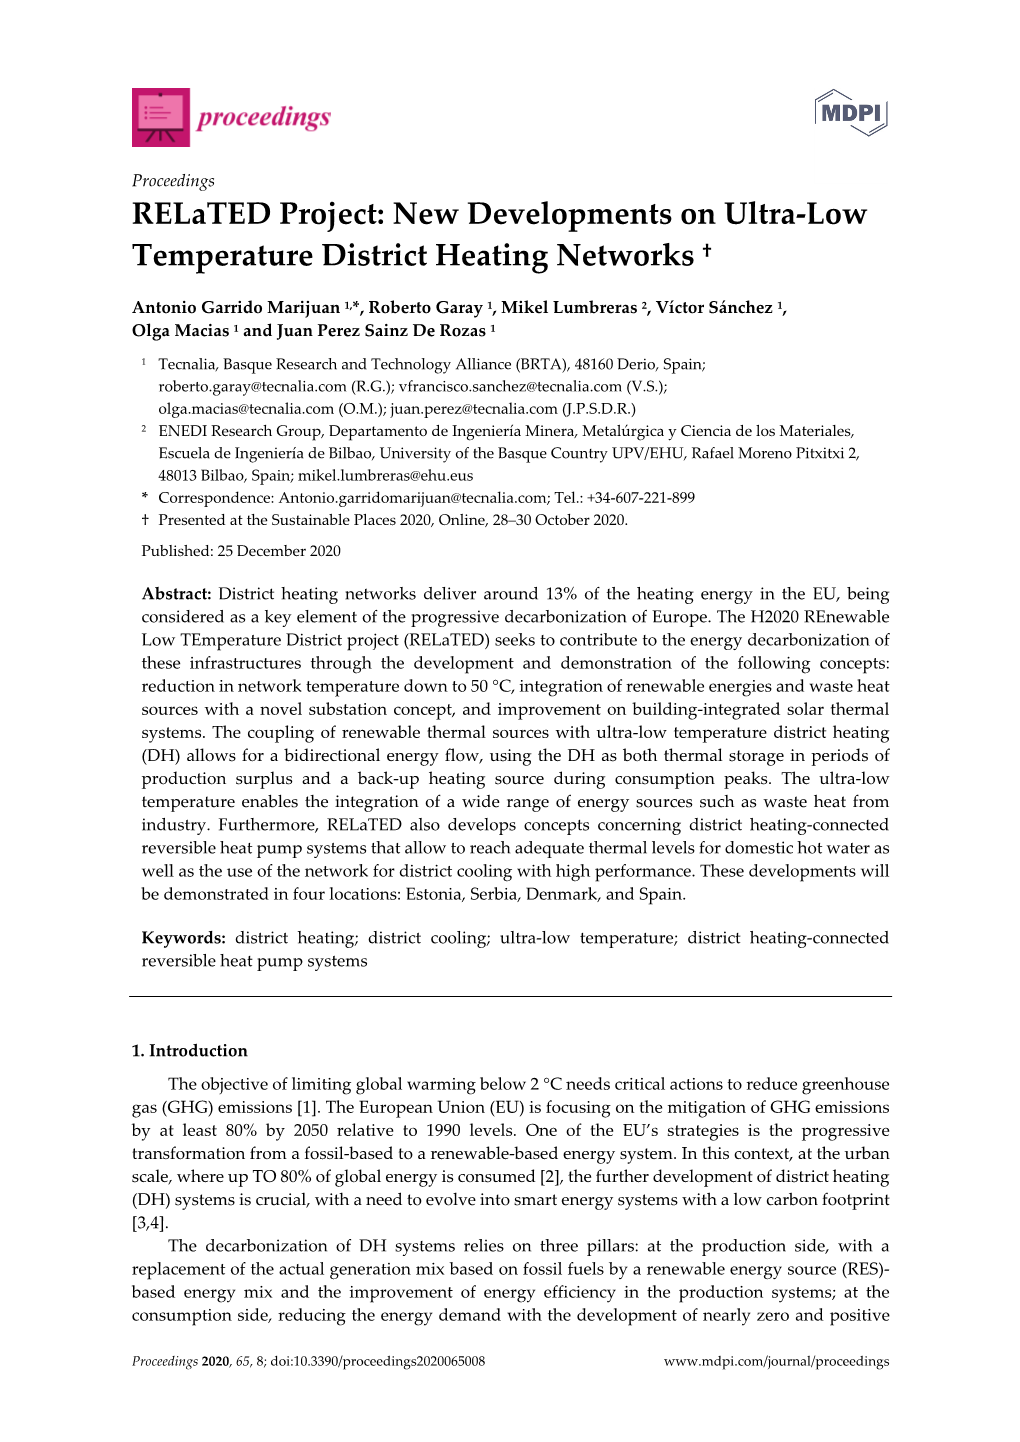 Related Project: New Developments on Ultra-Low Temperature District Heating Networks †